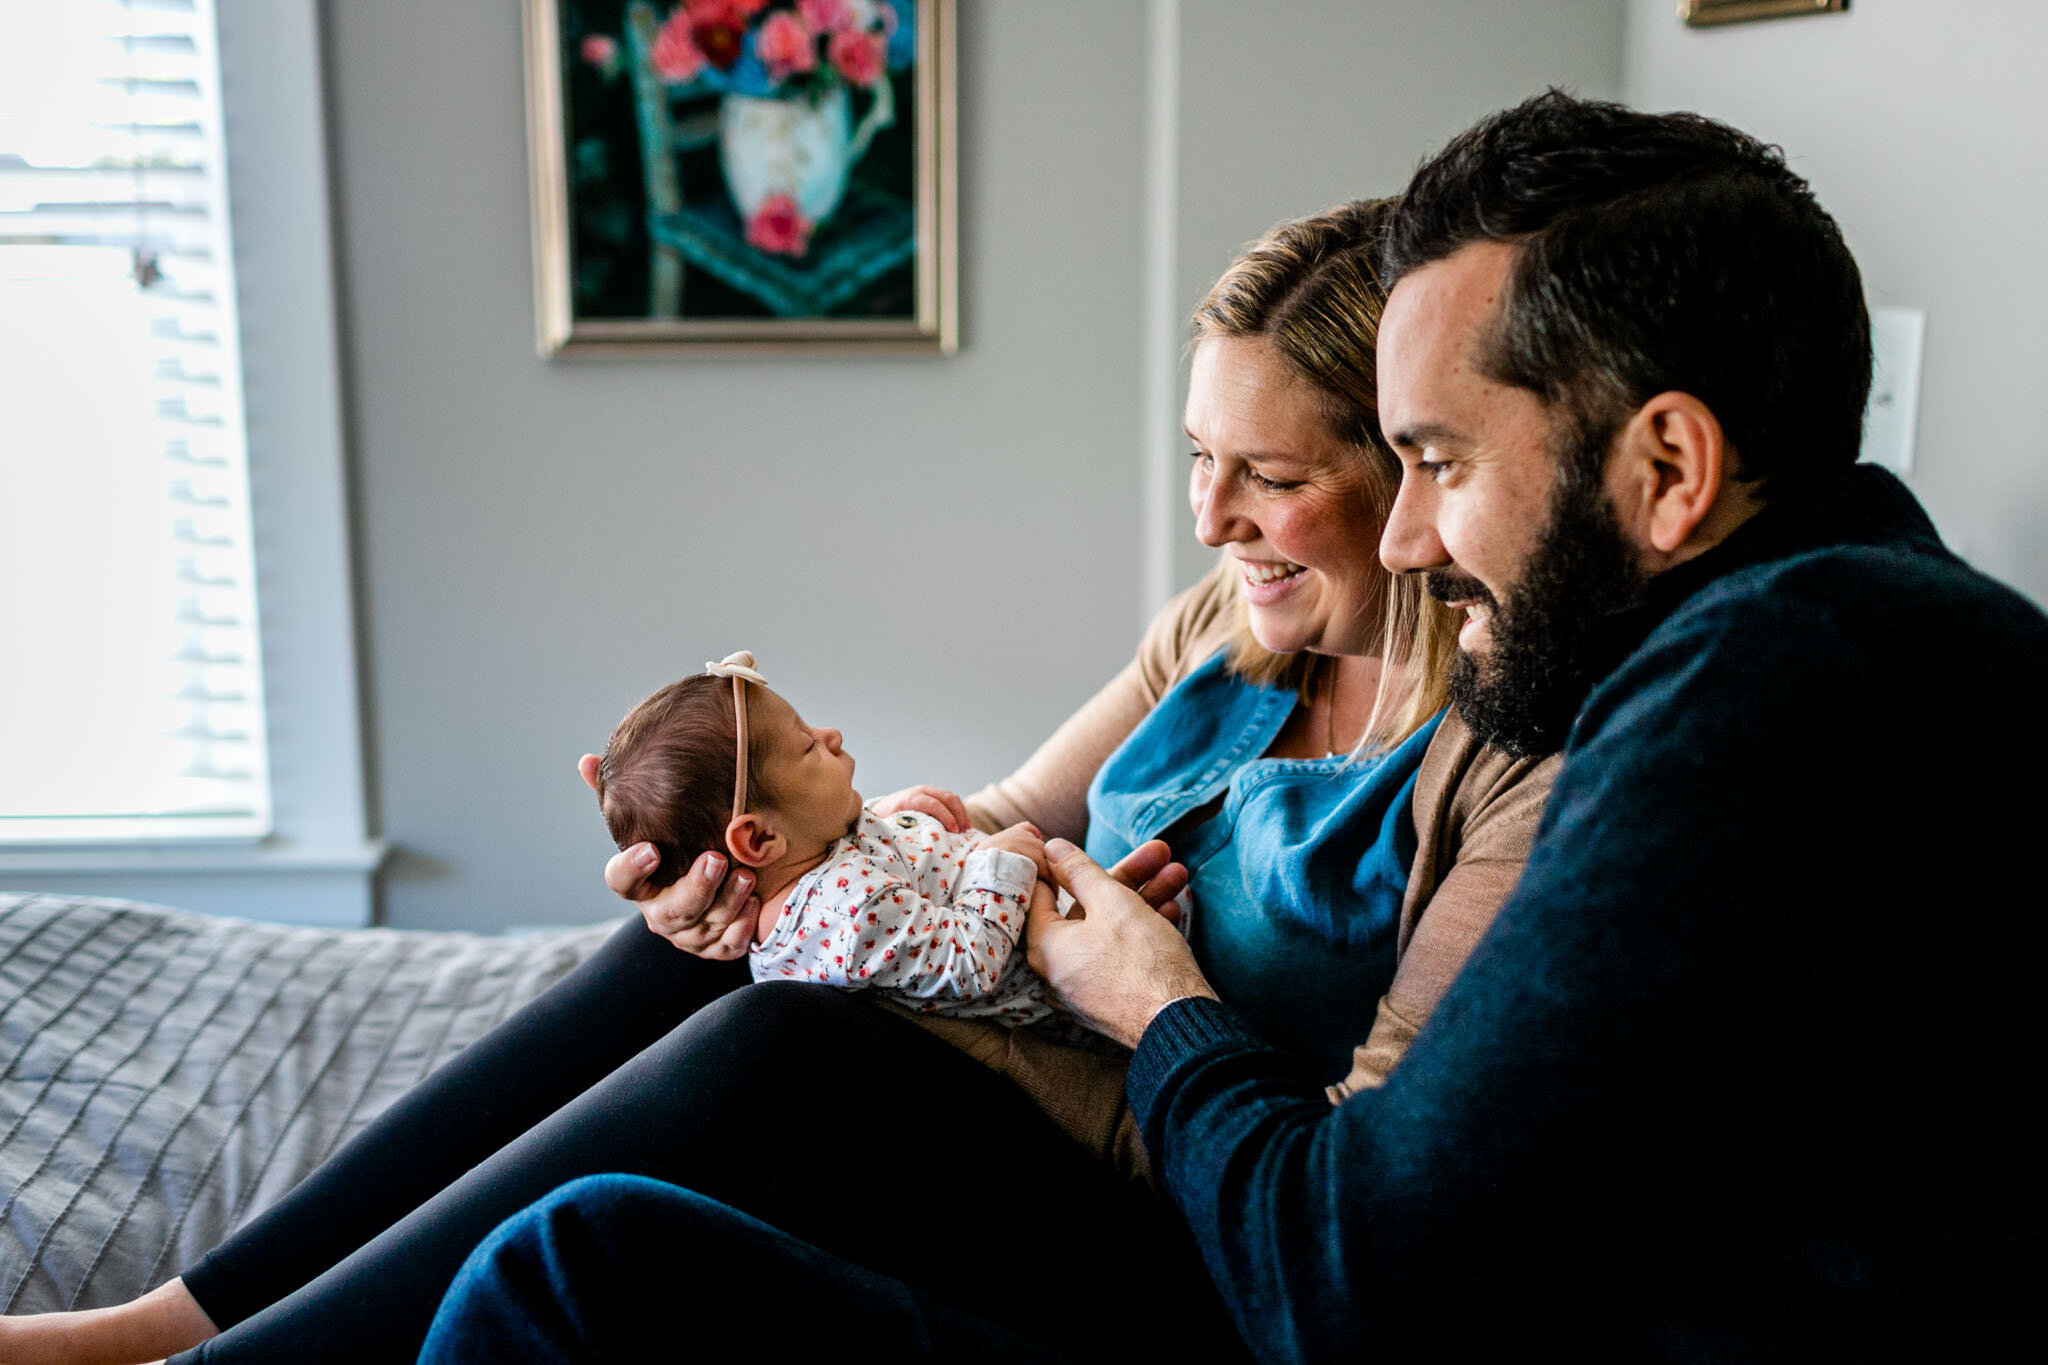 Durham Newborn Photographer | By G. Lin Photography | Parents looking at baby girl